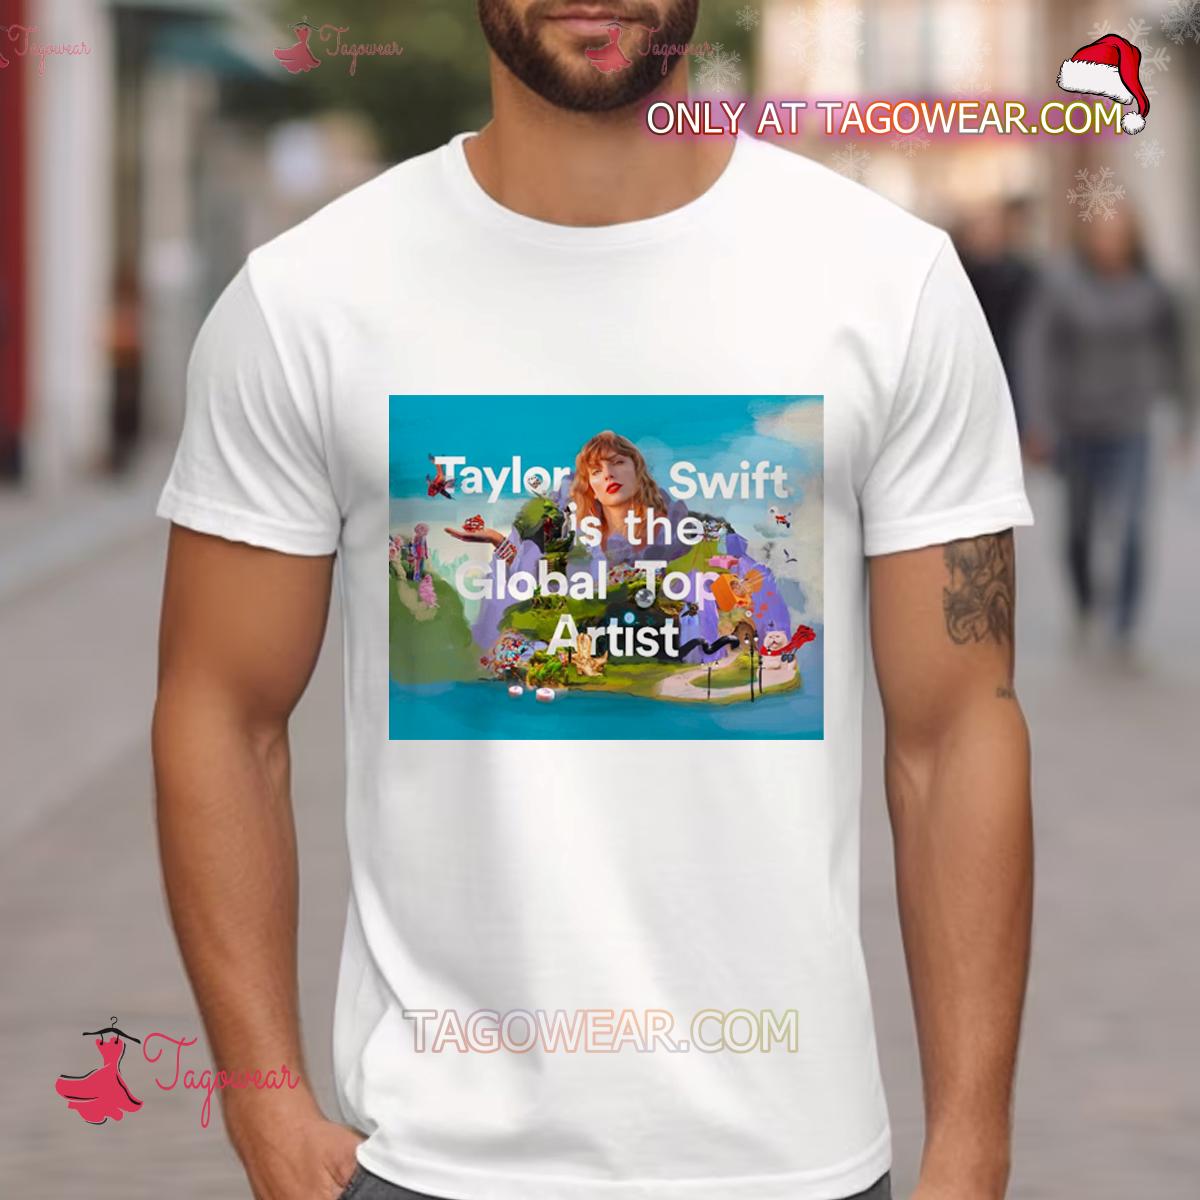 Taylor Swift is the Global Top Artist shirt a